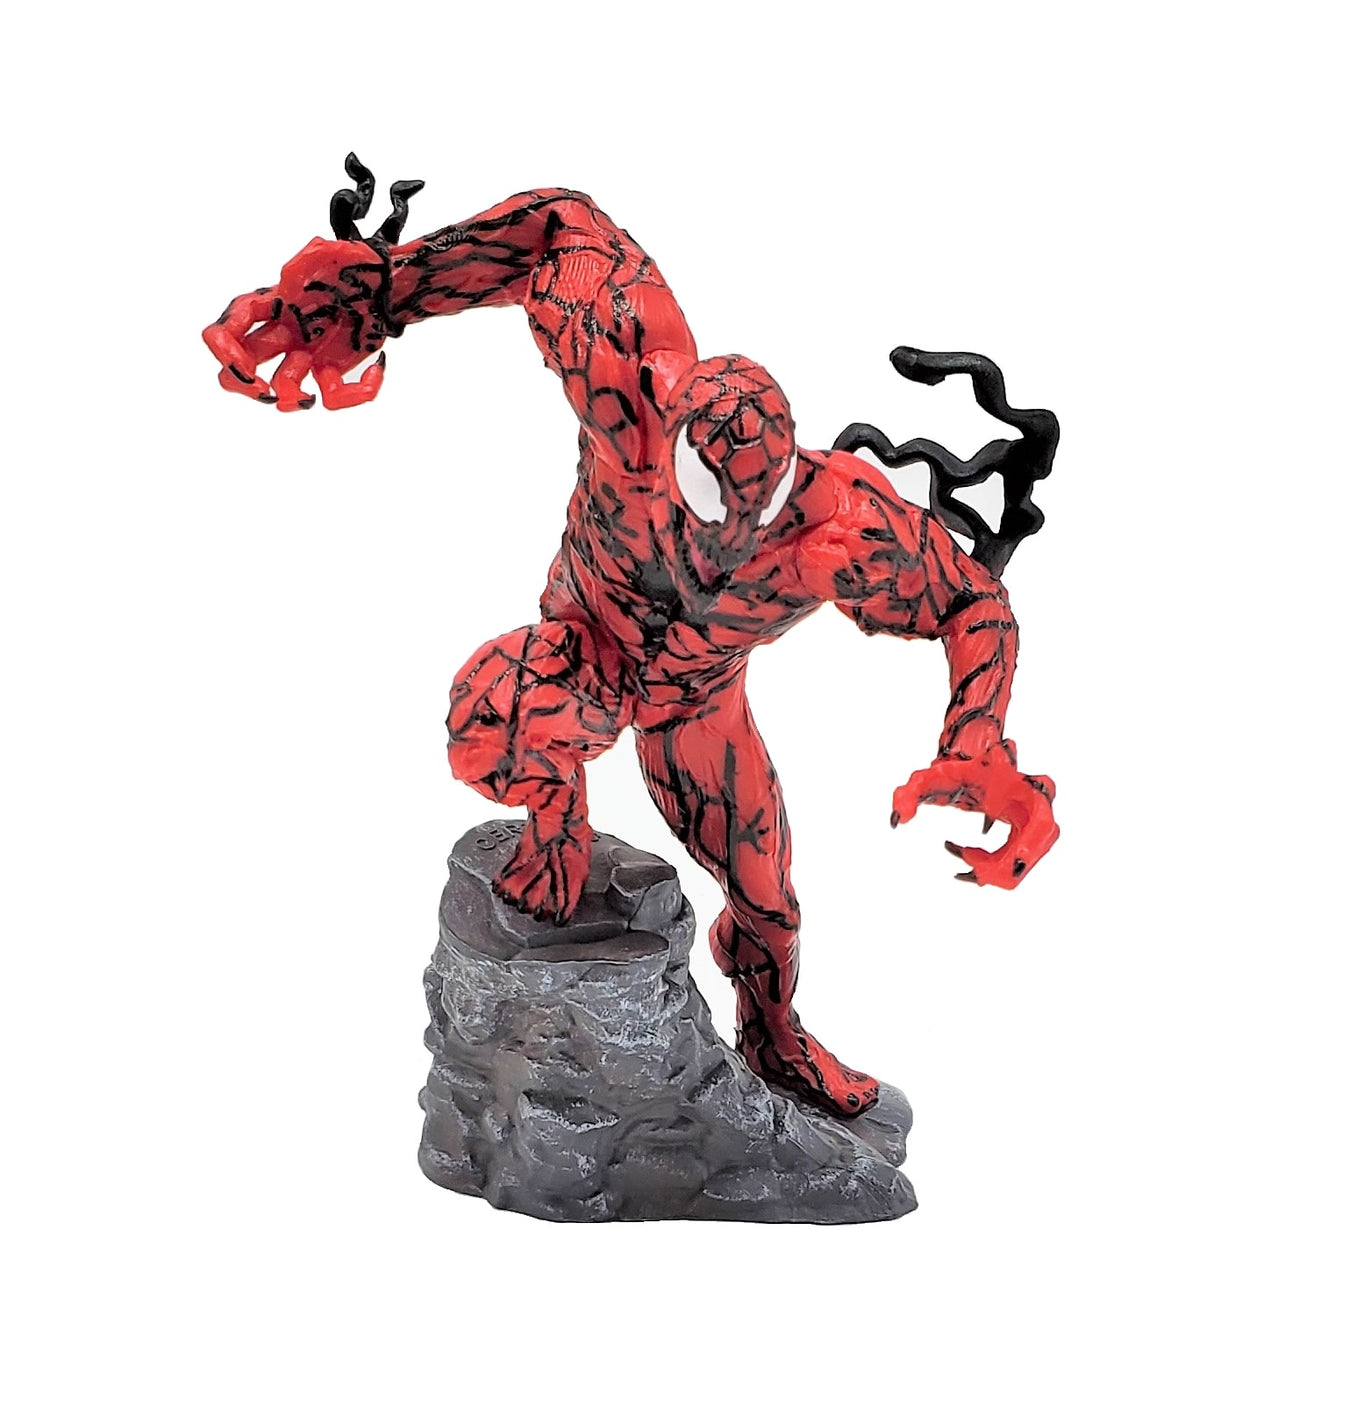 enom action figures from Venompool, Venom Spider-Man, Carnage, Carnage Spider-Man at Prodigy Toys!